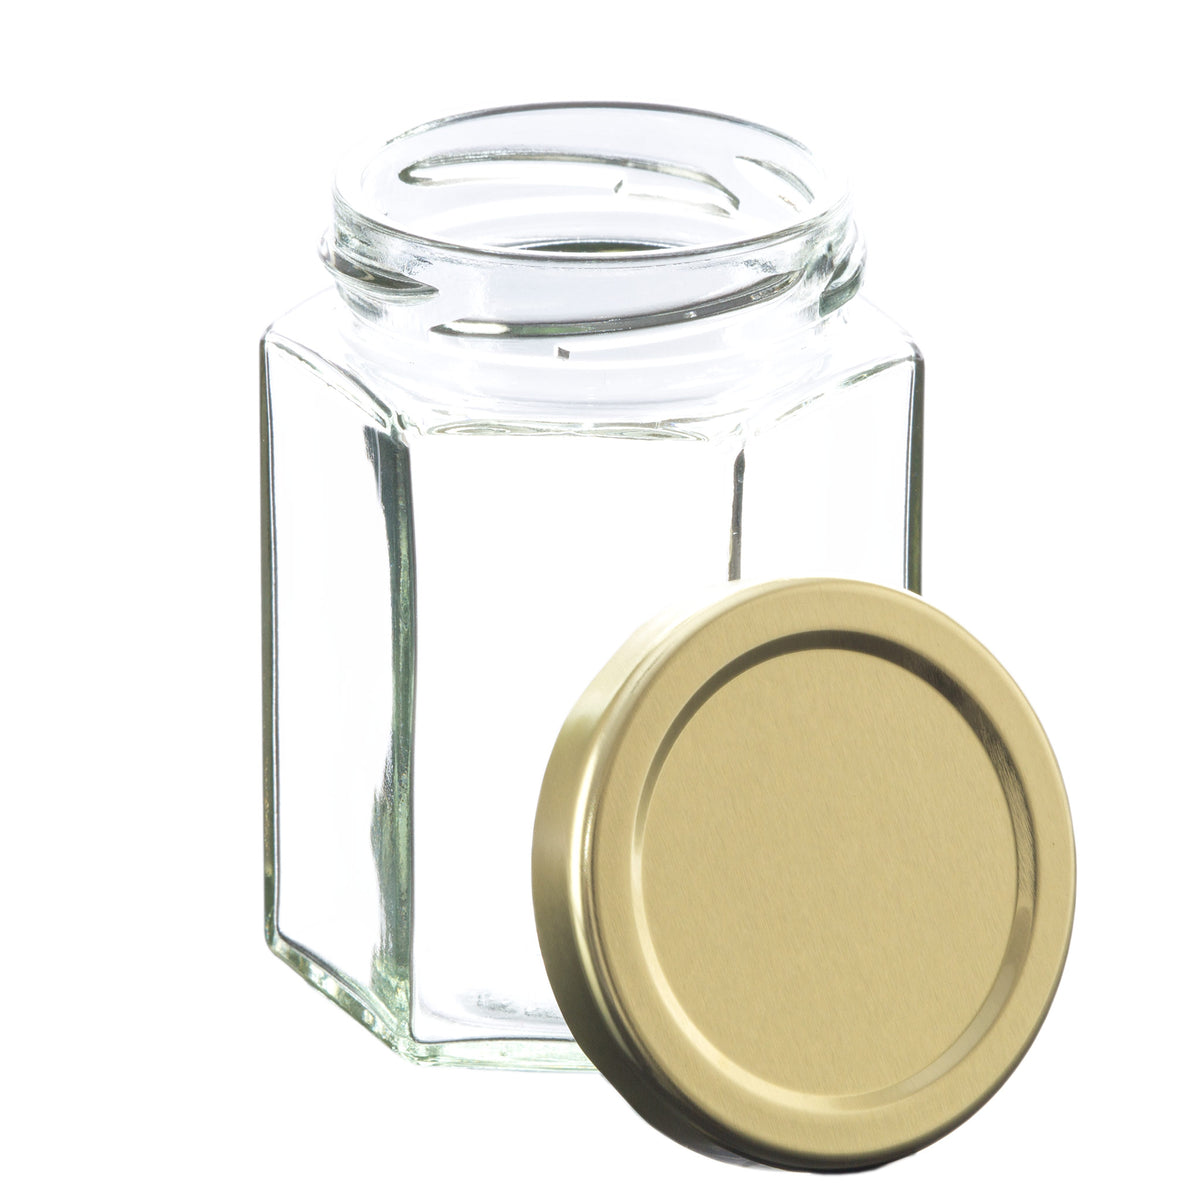 https://www.voyageursoapandcandle.shop/wp-content/uploads/1691/94/take-a-look-at-our-190-ml-hexagon-glass-jar-with-58mm-gold-metal-lug-lid-voyageur-glass-jars-collection-get-them-now_2.jpg